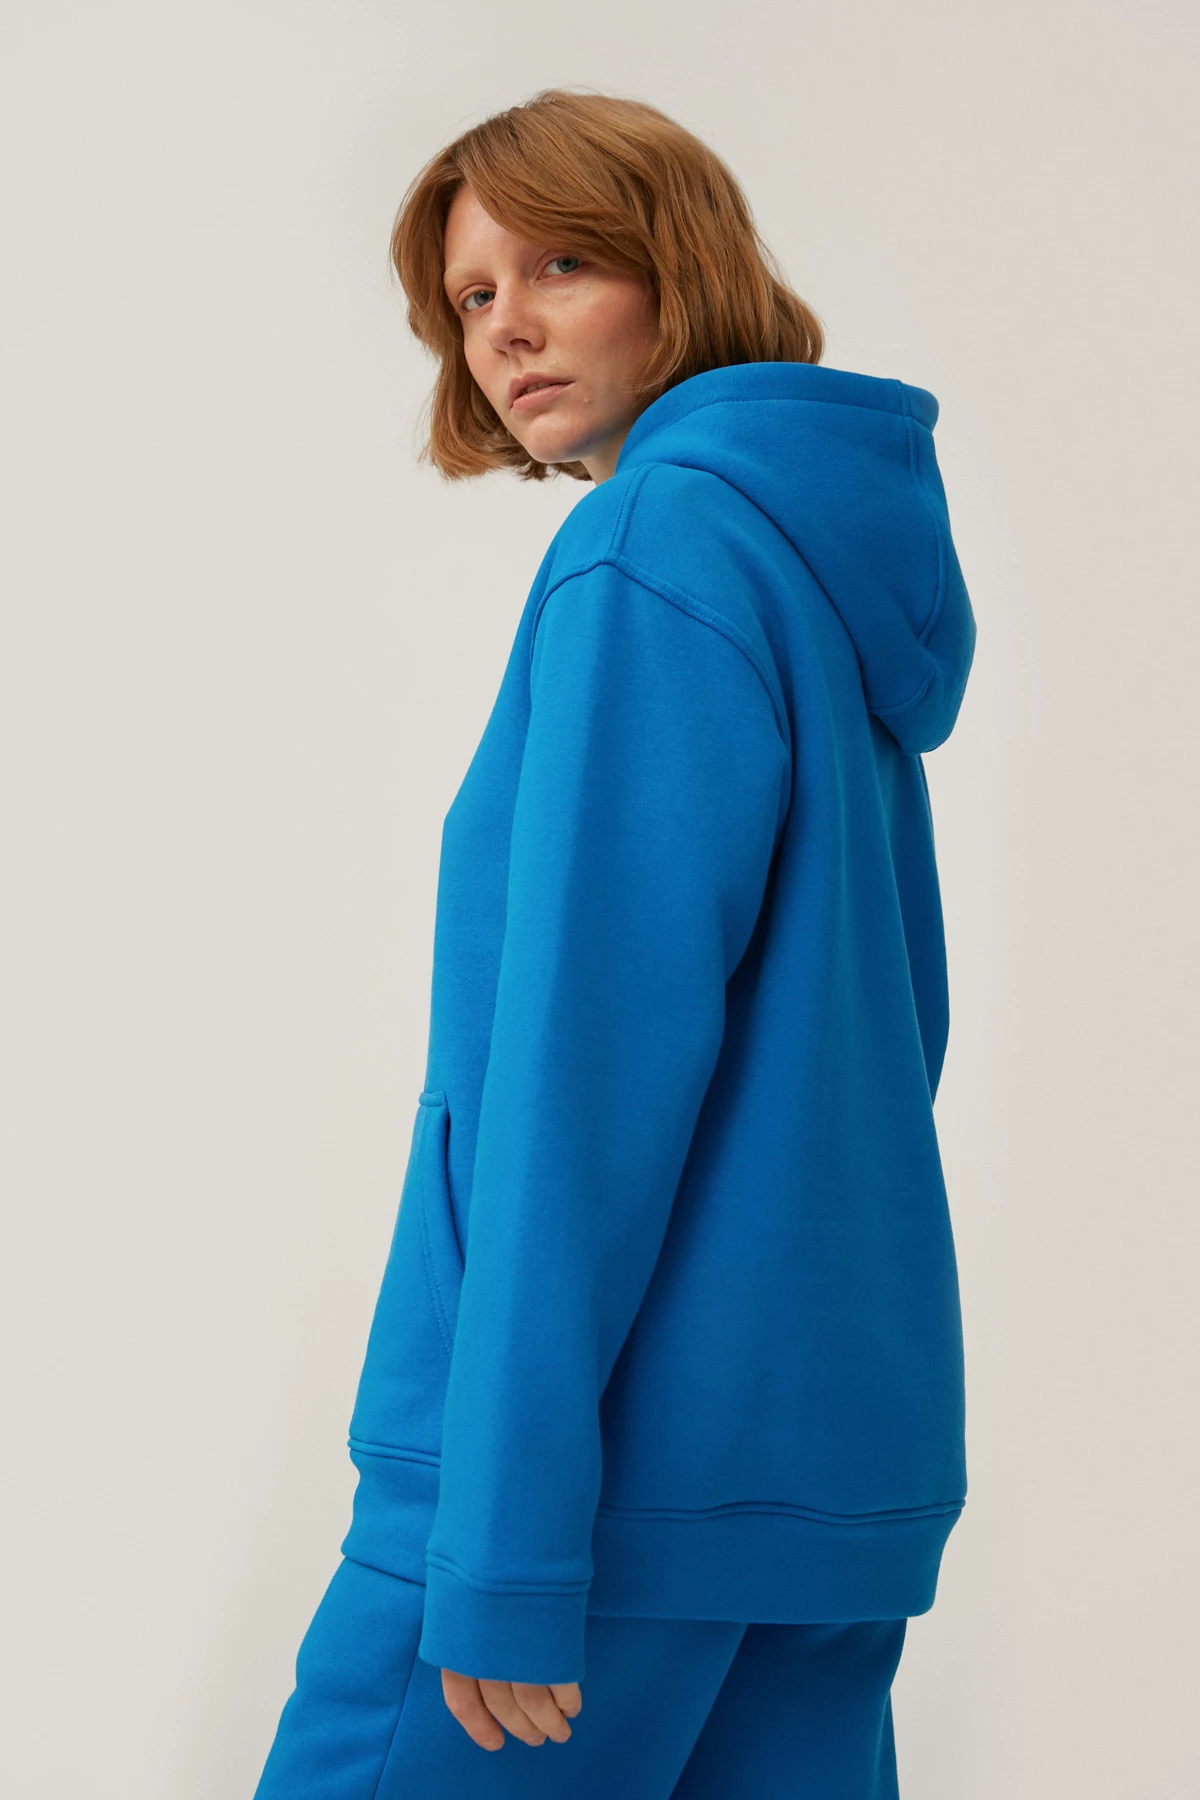 Elelctric blue jersey hoodie "Days off" with fleece, photo 6